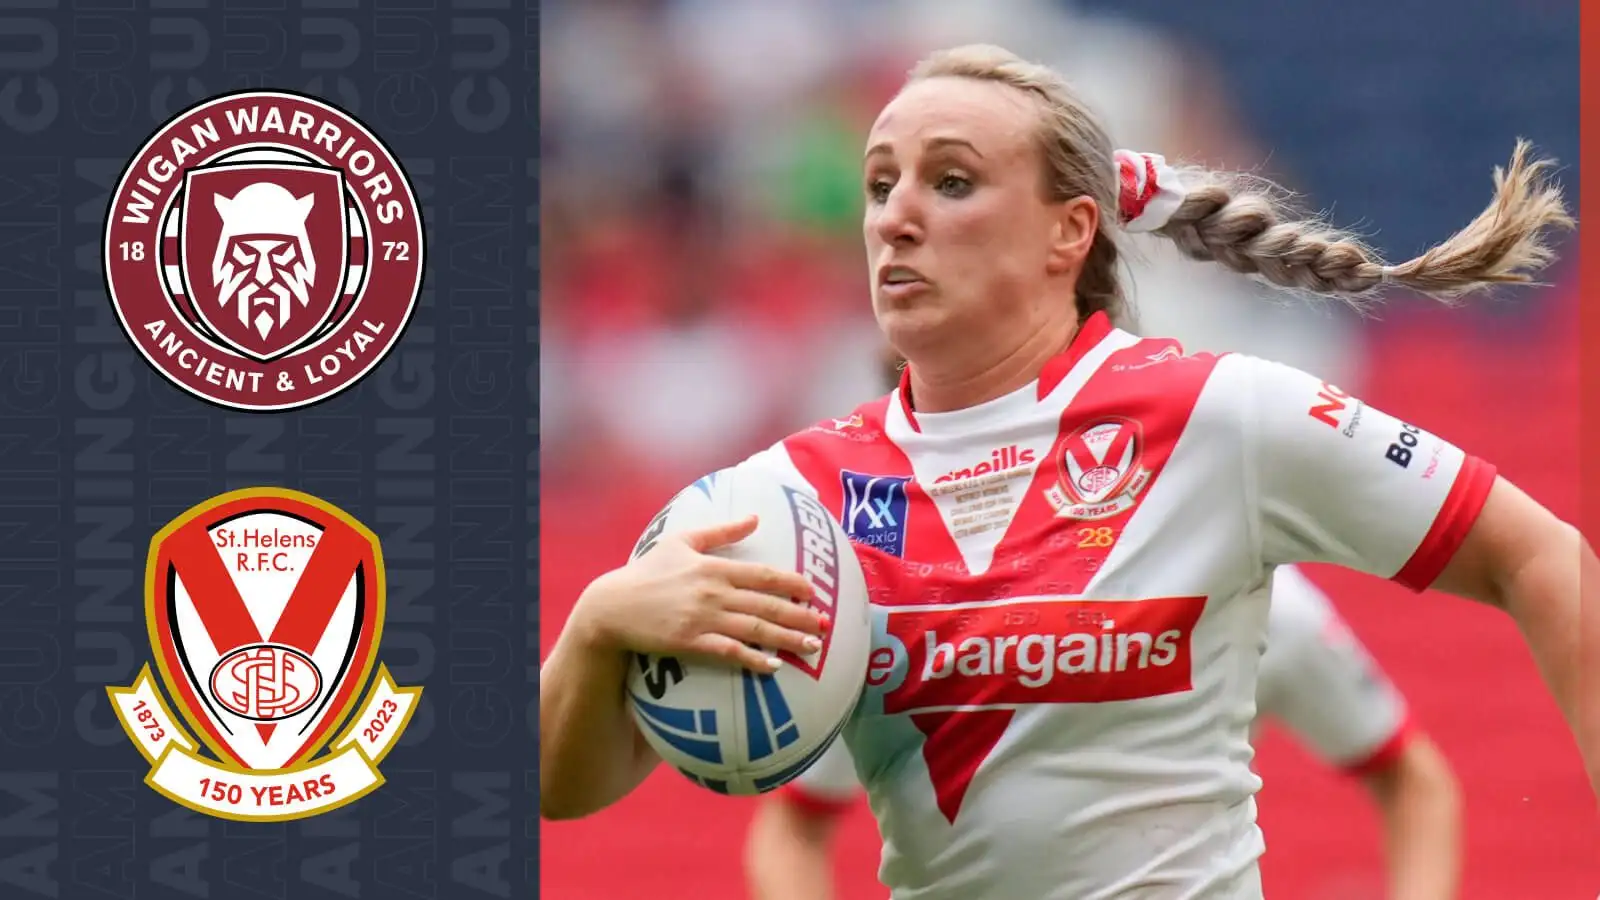 Exclusive: St Helens’ Jodie Cunningham turns down Wigan Warriors transfer approach as reason for rejection is revealed